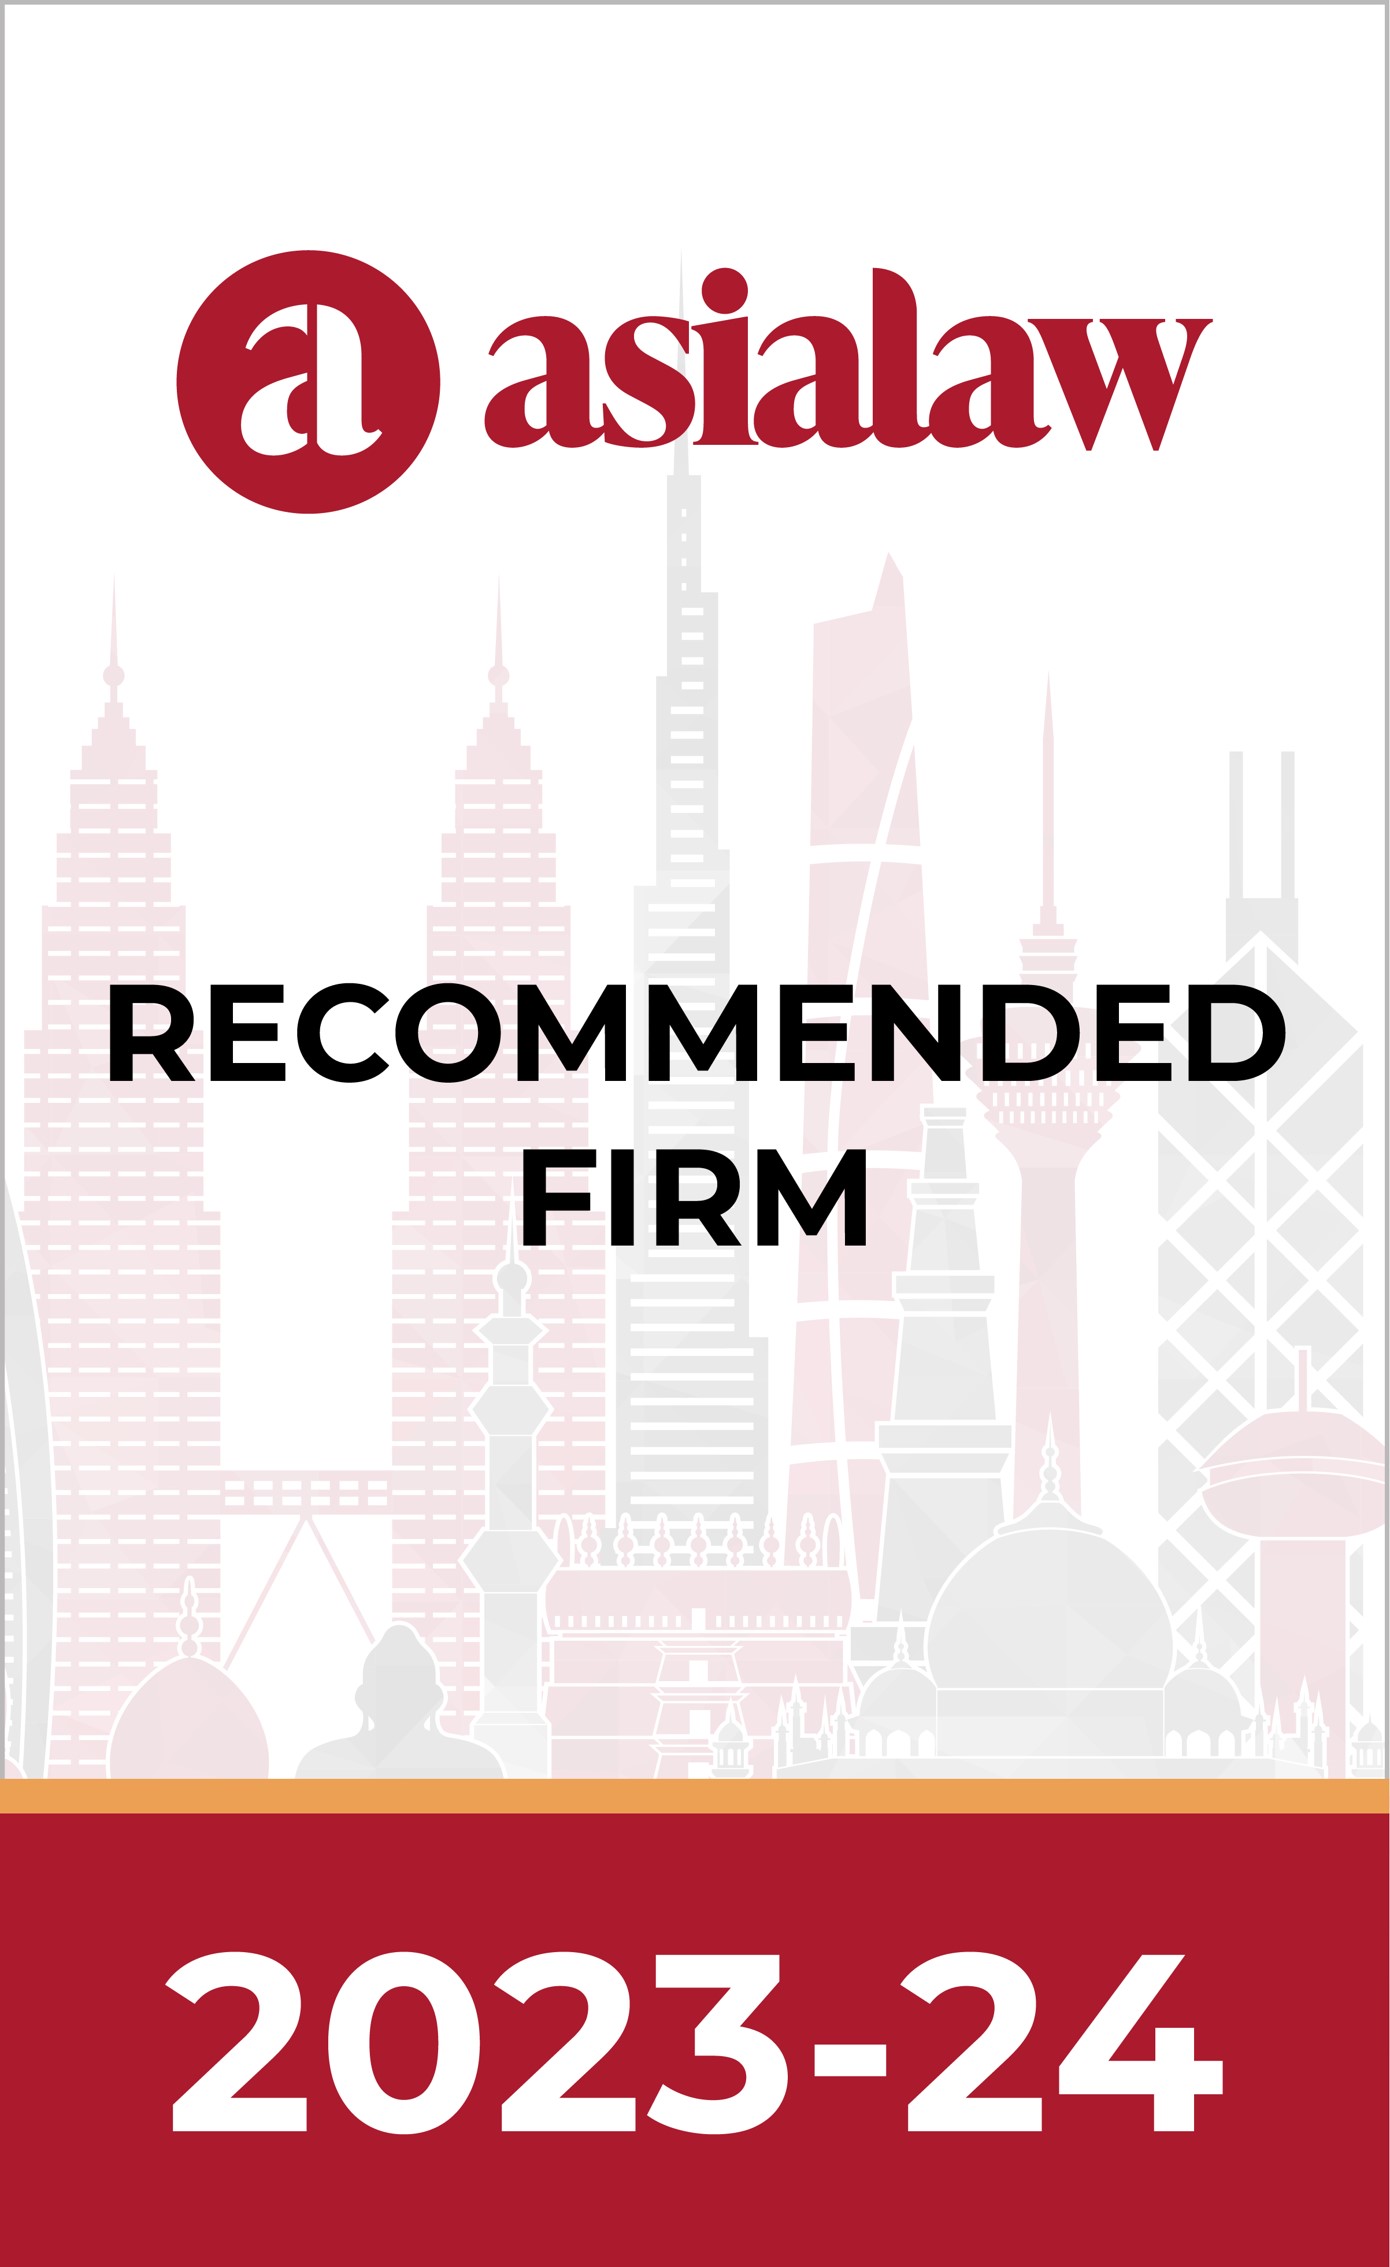 Recognised as a "Recommended" Firm by asialaw 2023/24